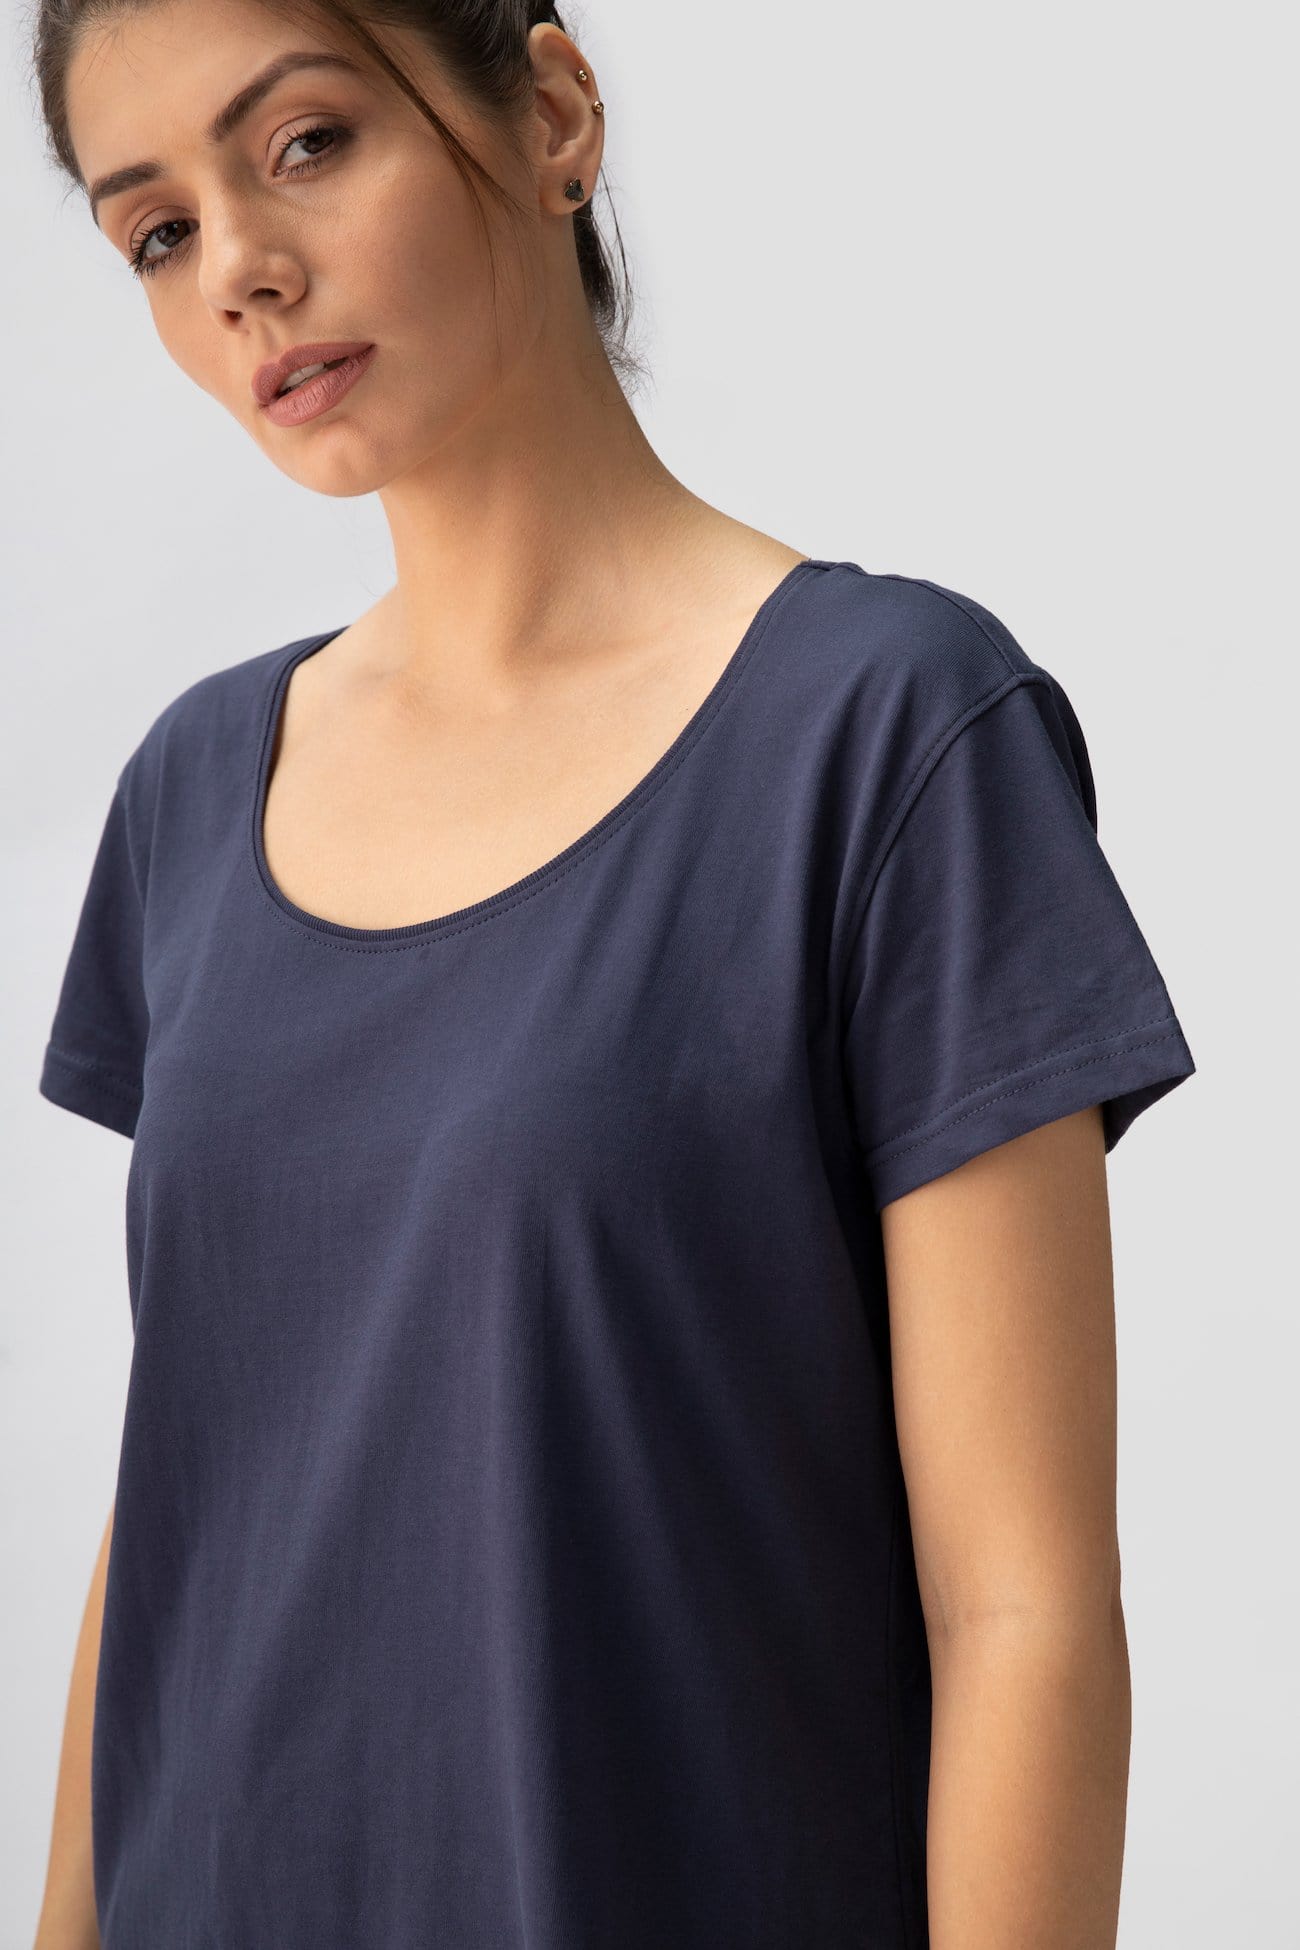 Saltpetre womens 100% organic half sleeve shirt with round neck and loose ankle length pants with pockets for lounge and casual wear. In navy blue color